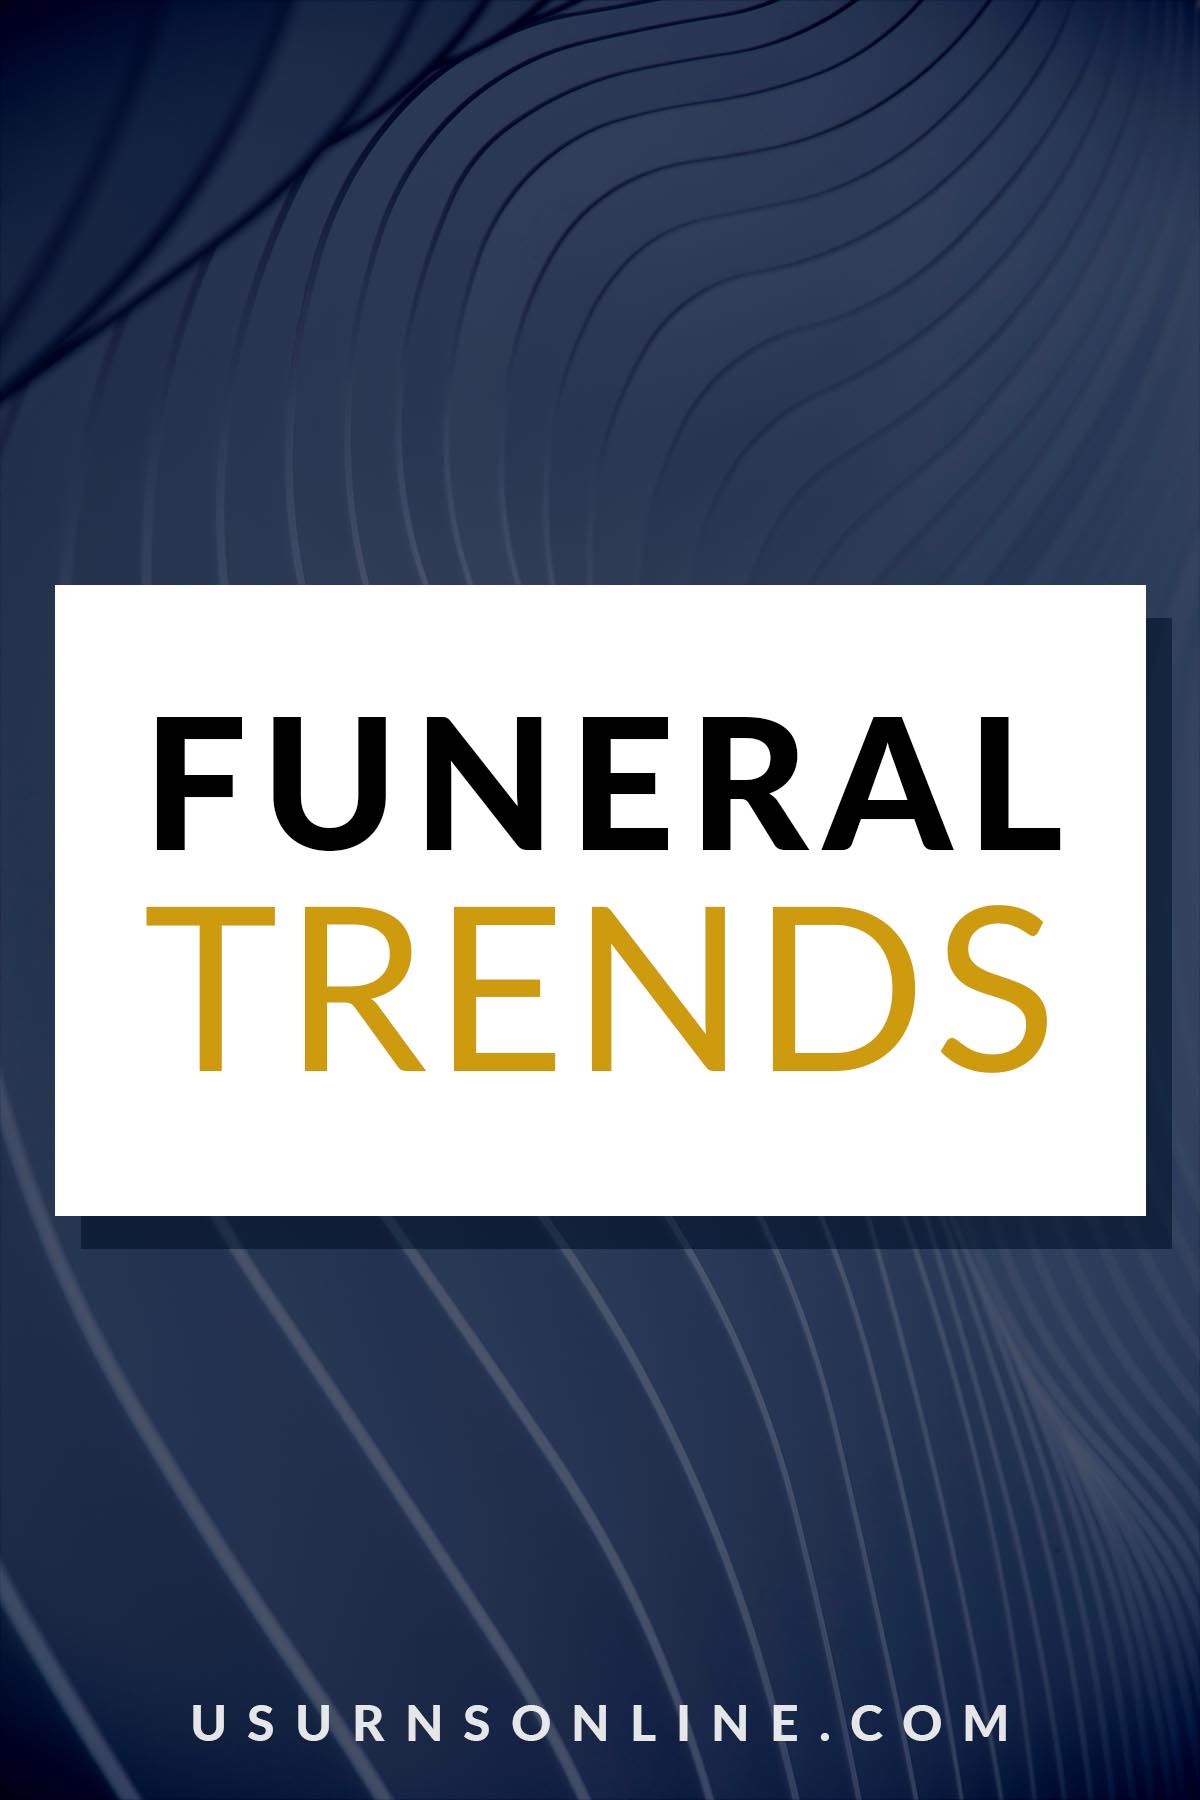 What are the up and coming funeral trends?